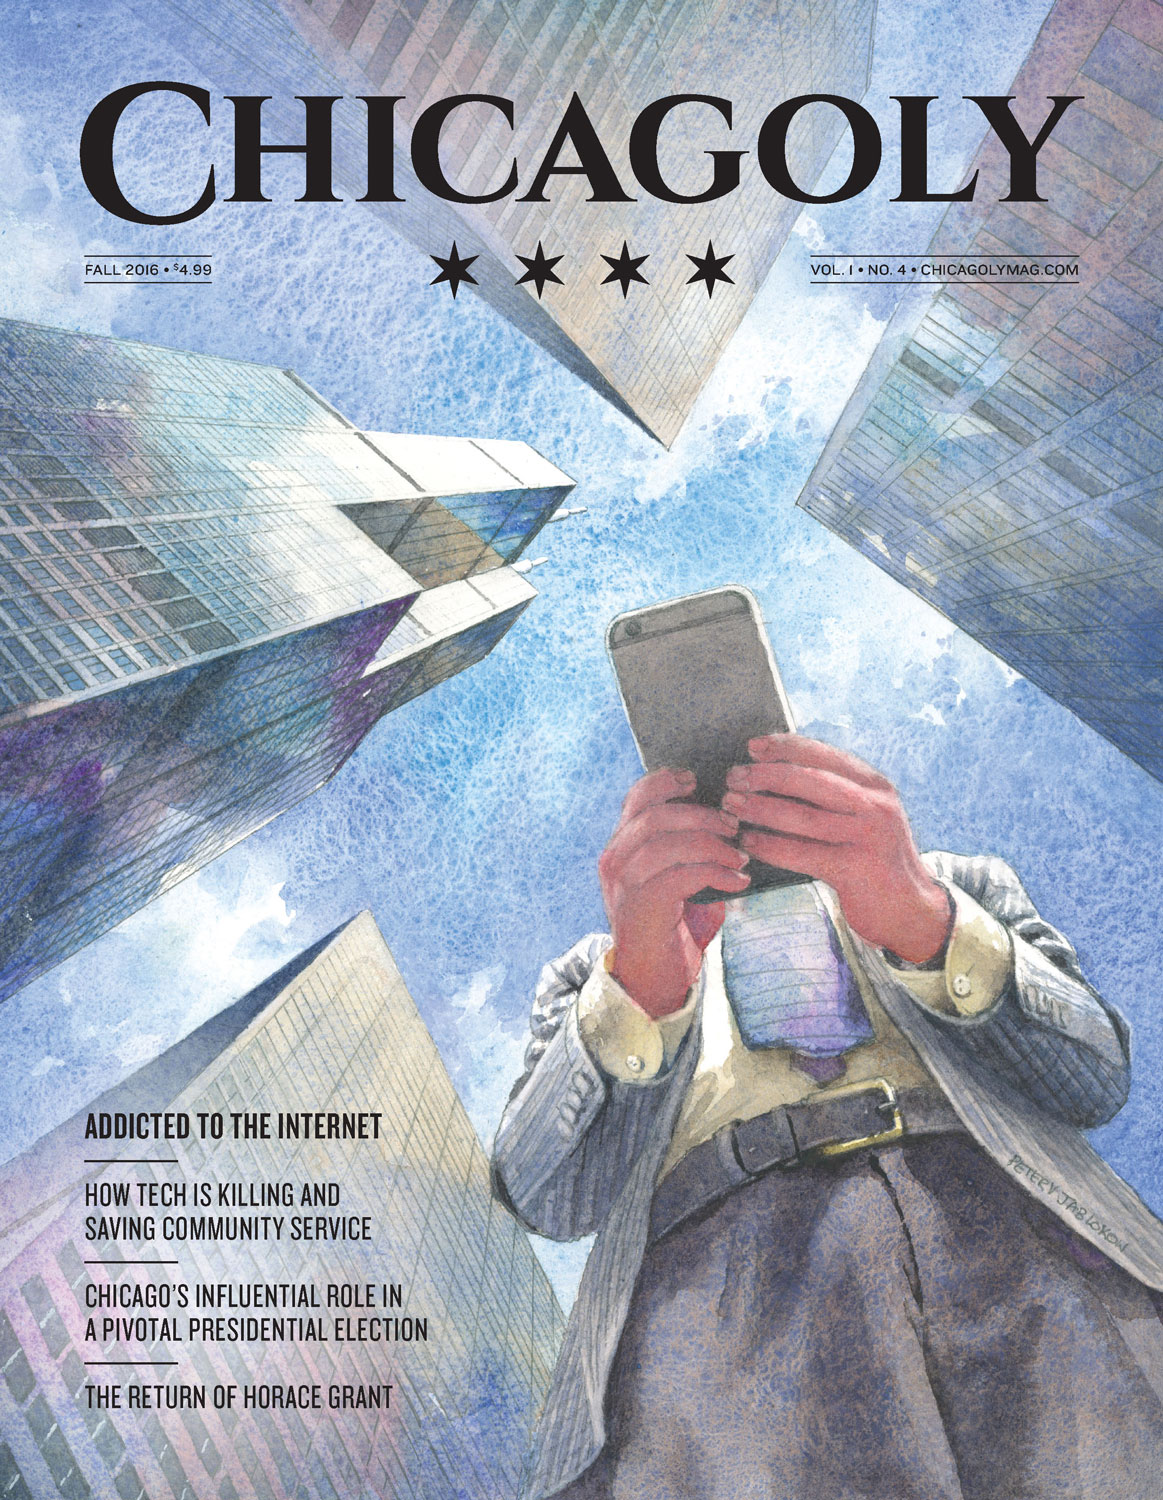 Chicagoly Magazine Cover, fall 2016